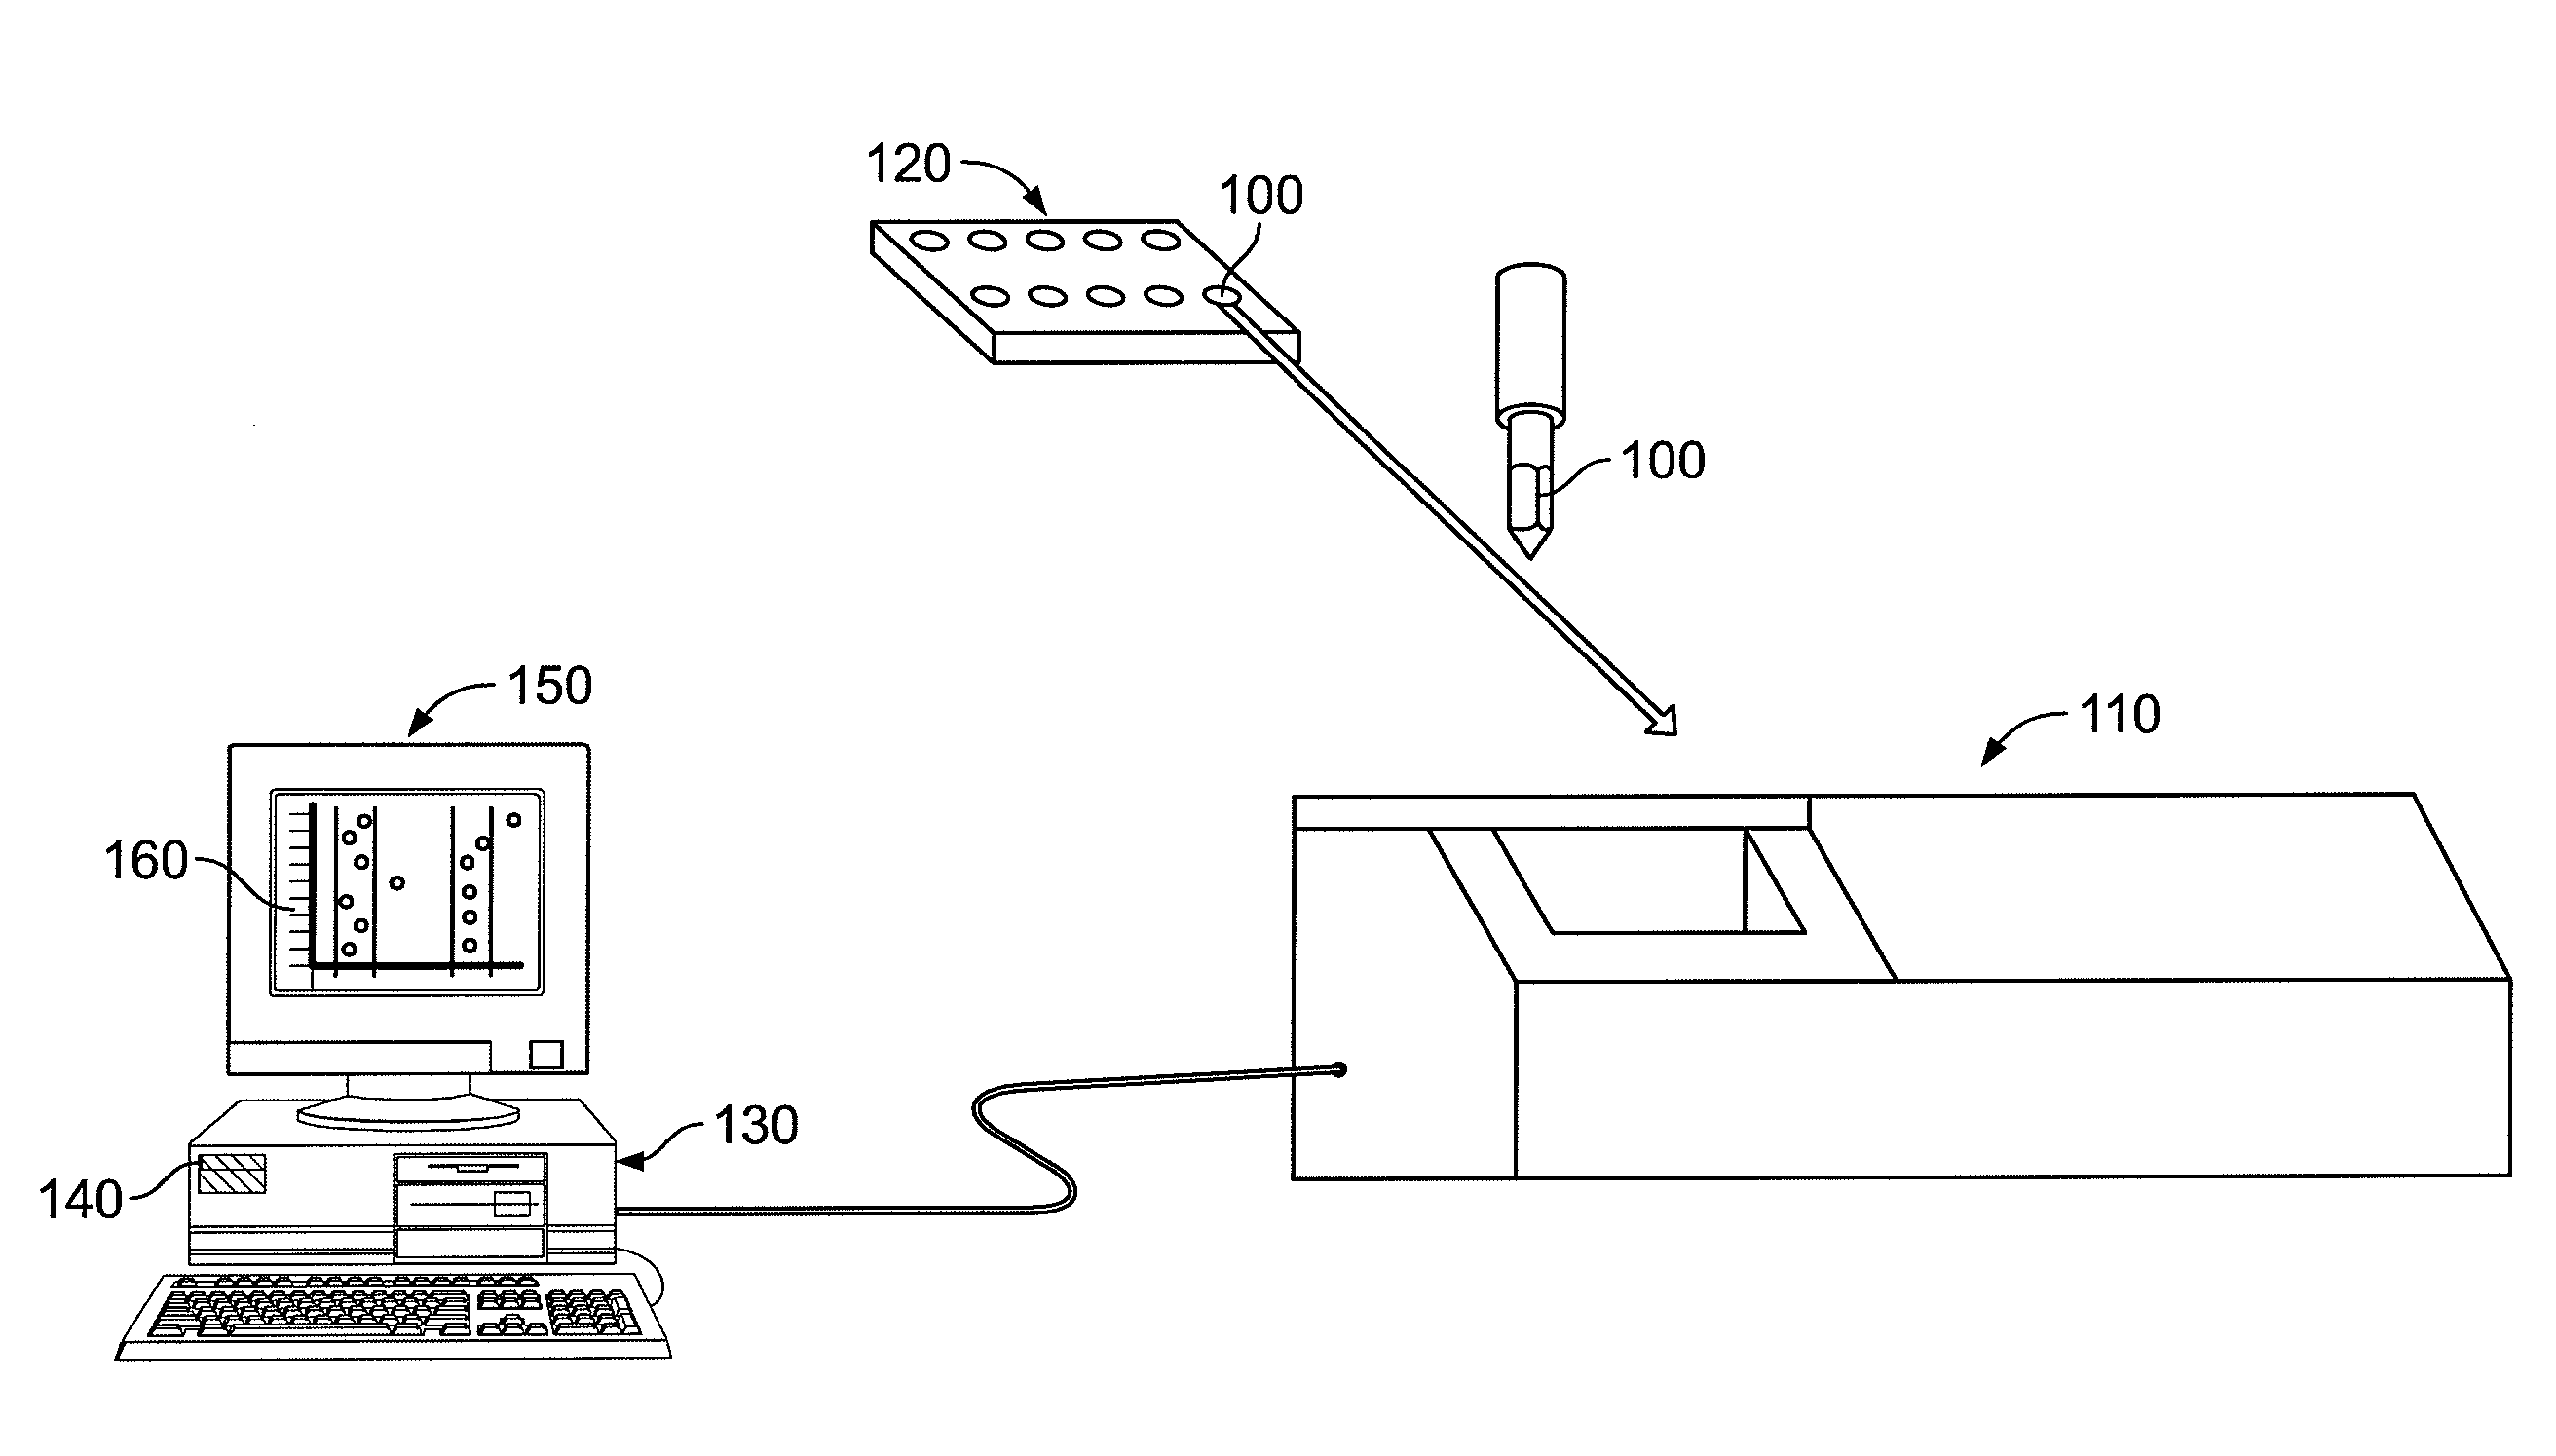 System, method, and computer program product for analyzing spectrometry data to identify and quantify individual components in a sample